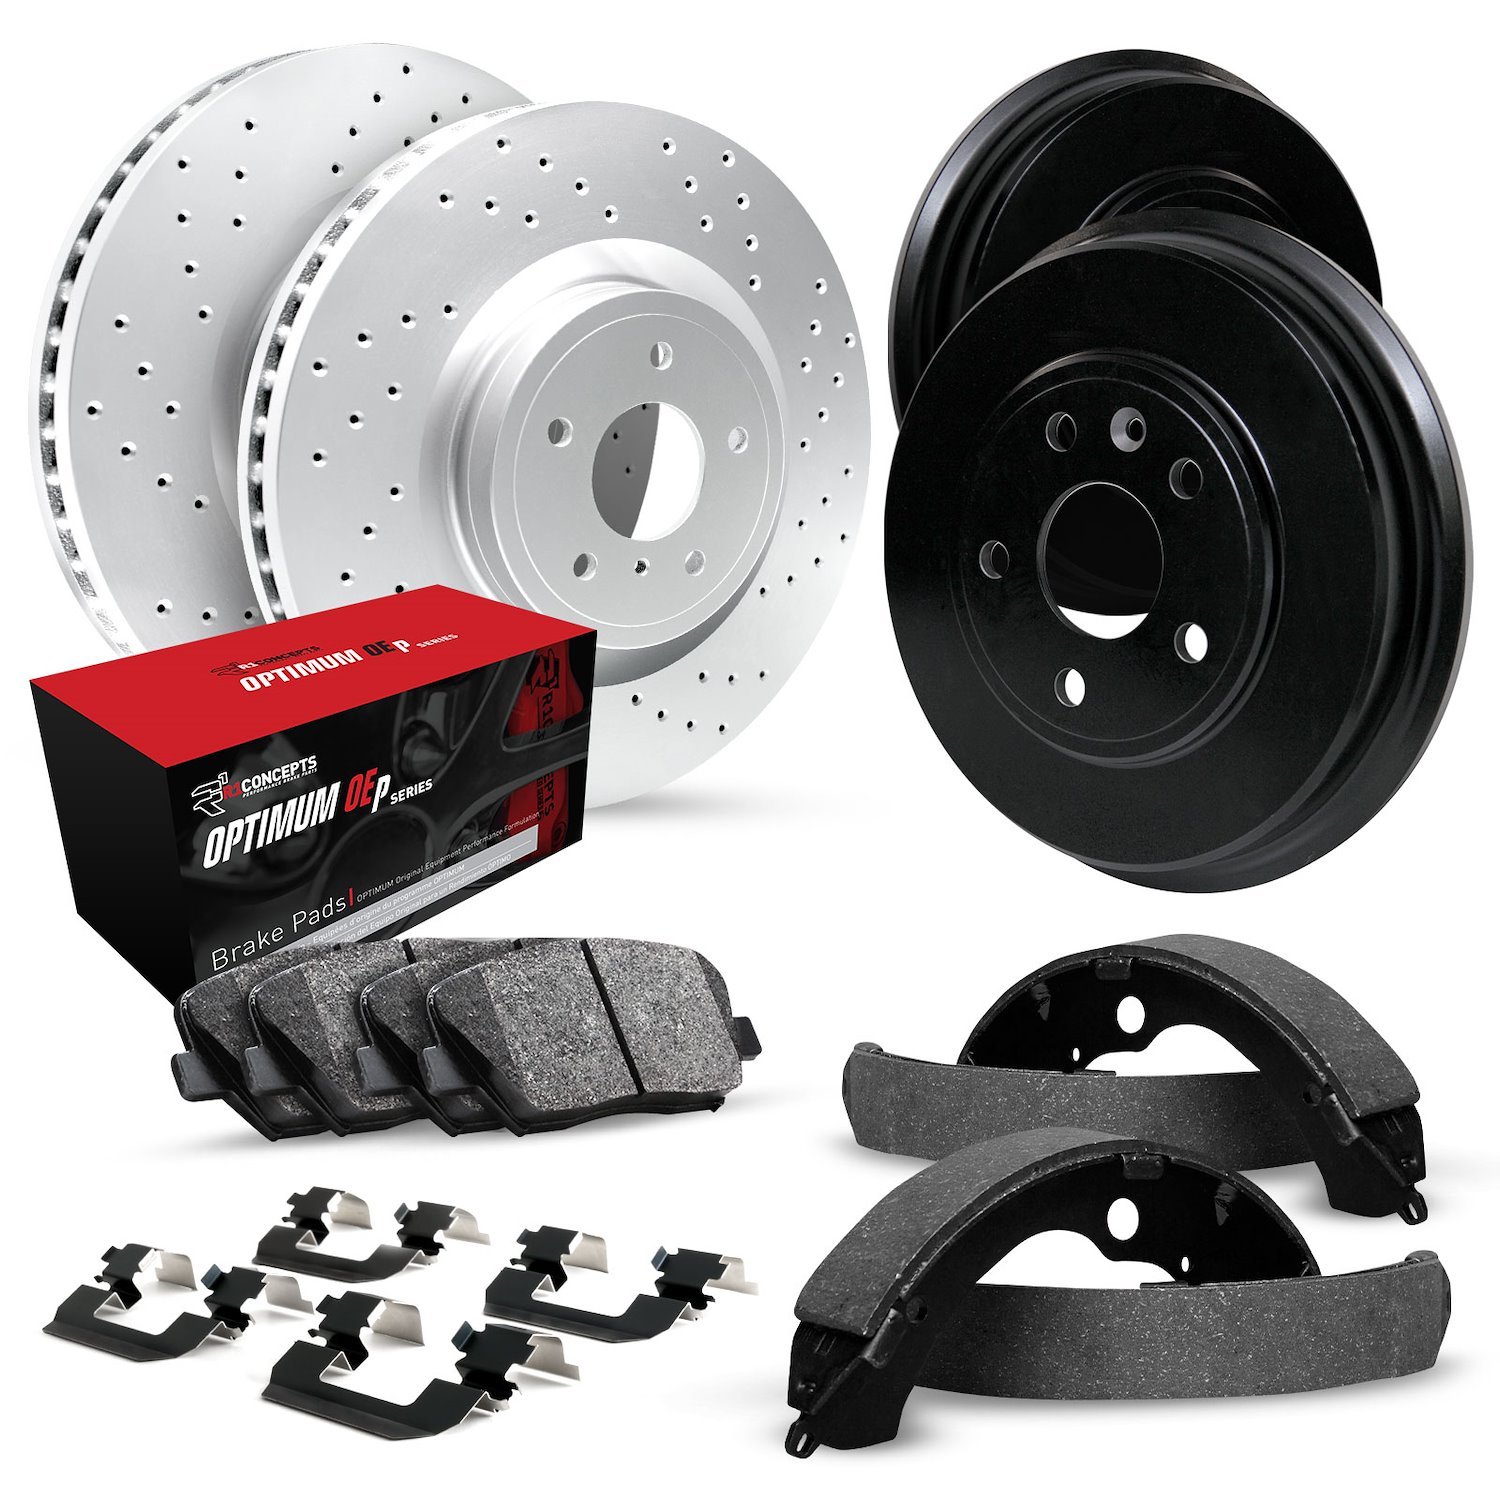 GEO-Carbon Drilled Brake Rotor & Drum Set w/Optimum OE Pads, Shoes, & Hardware, 1972-1975 GM, Position: Front & Rear